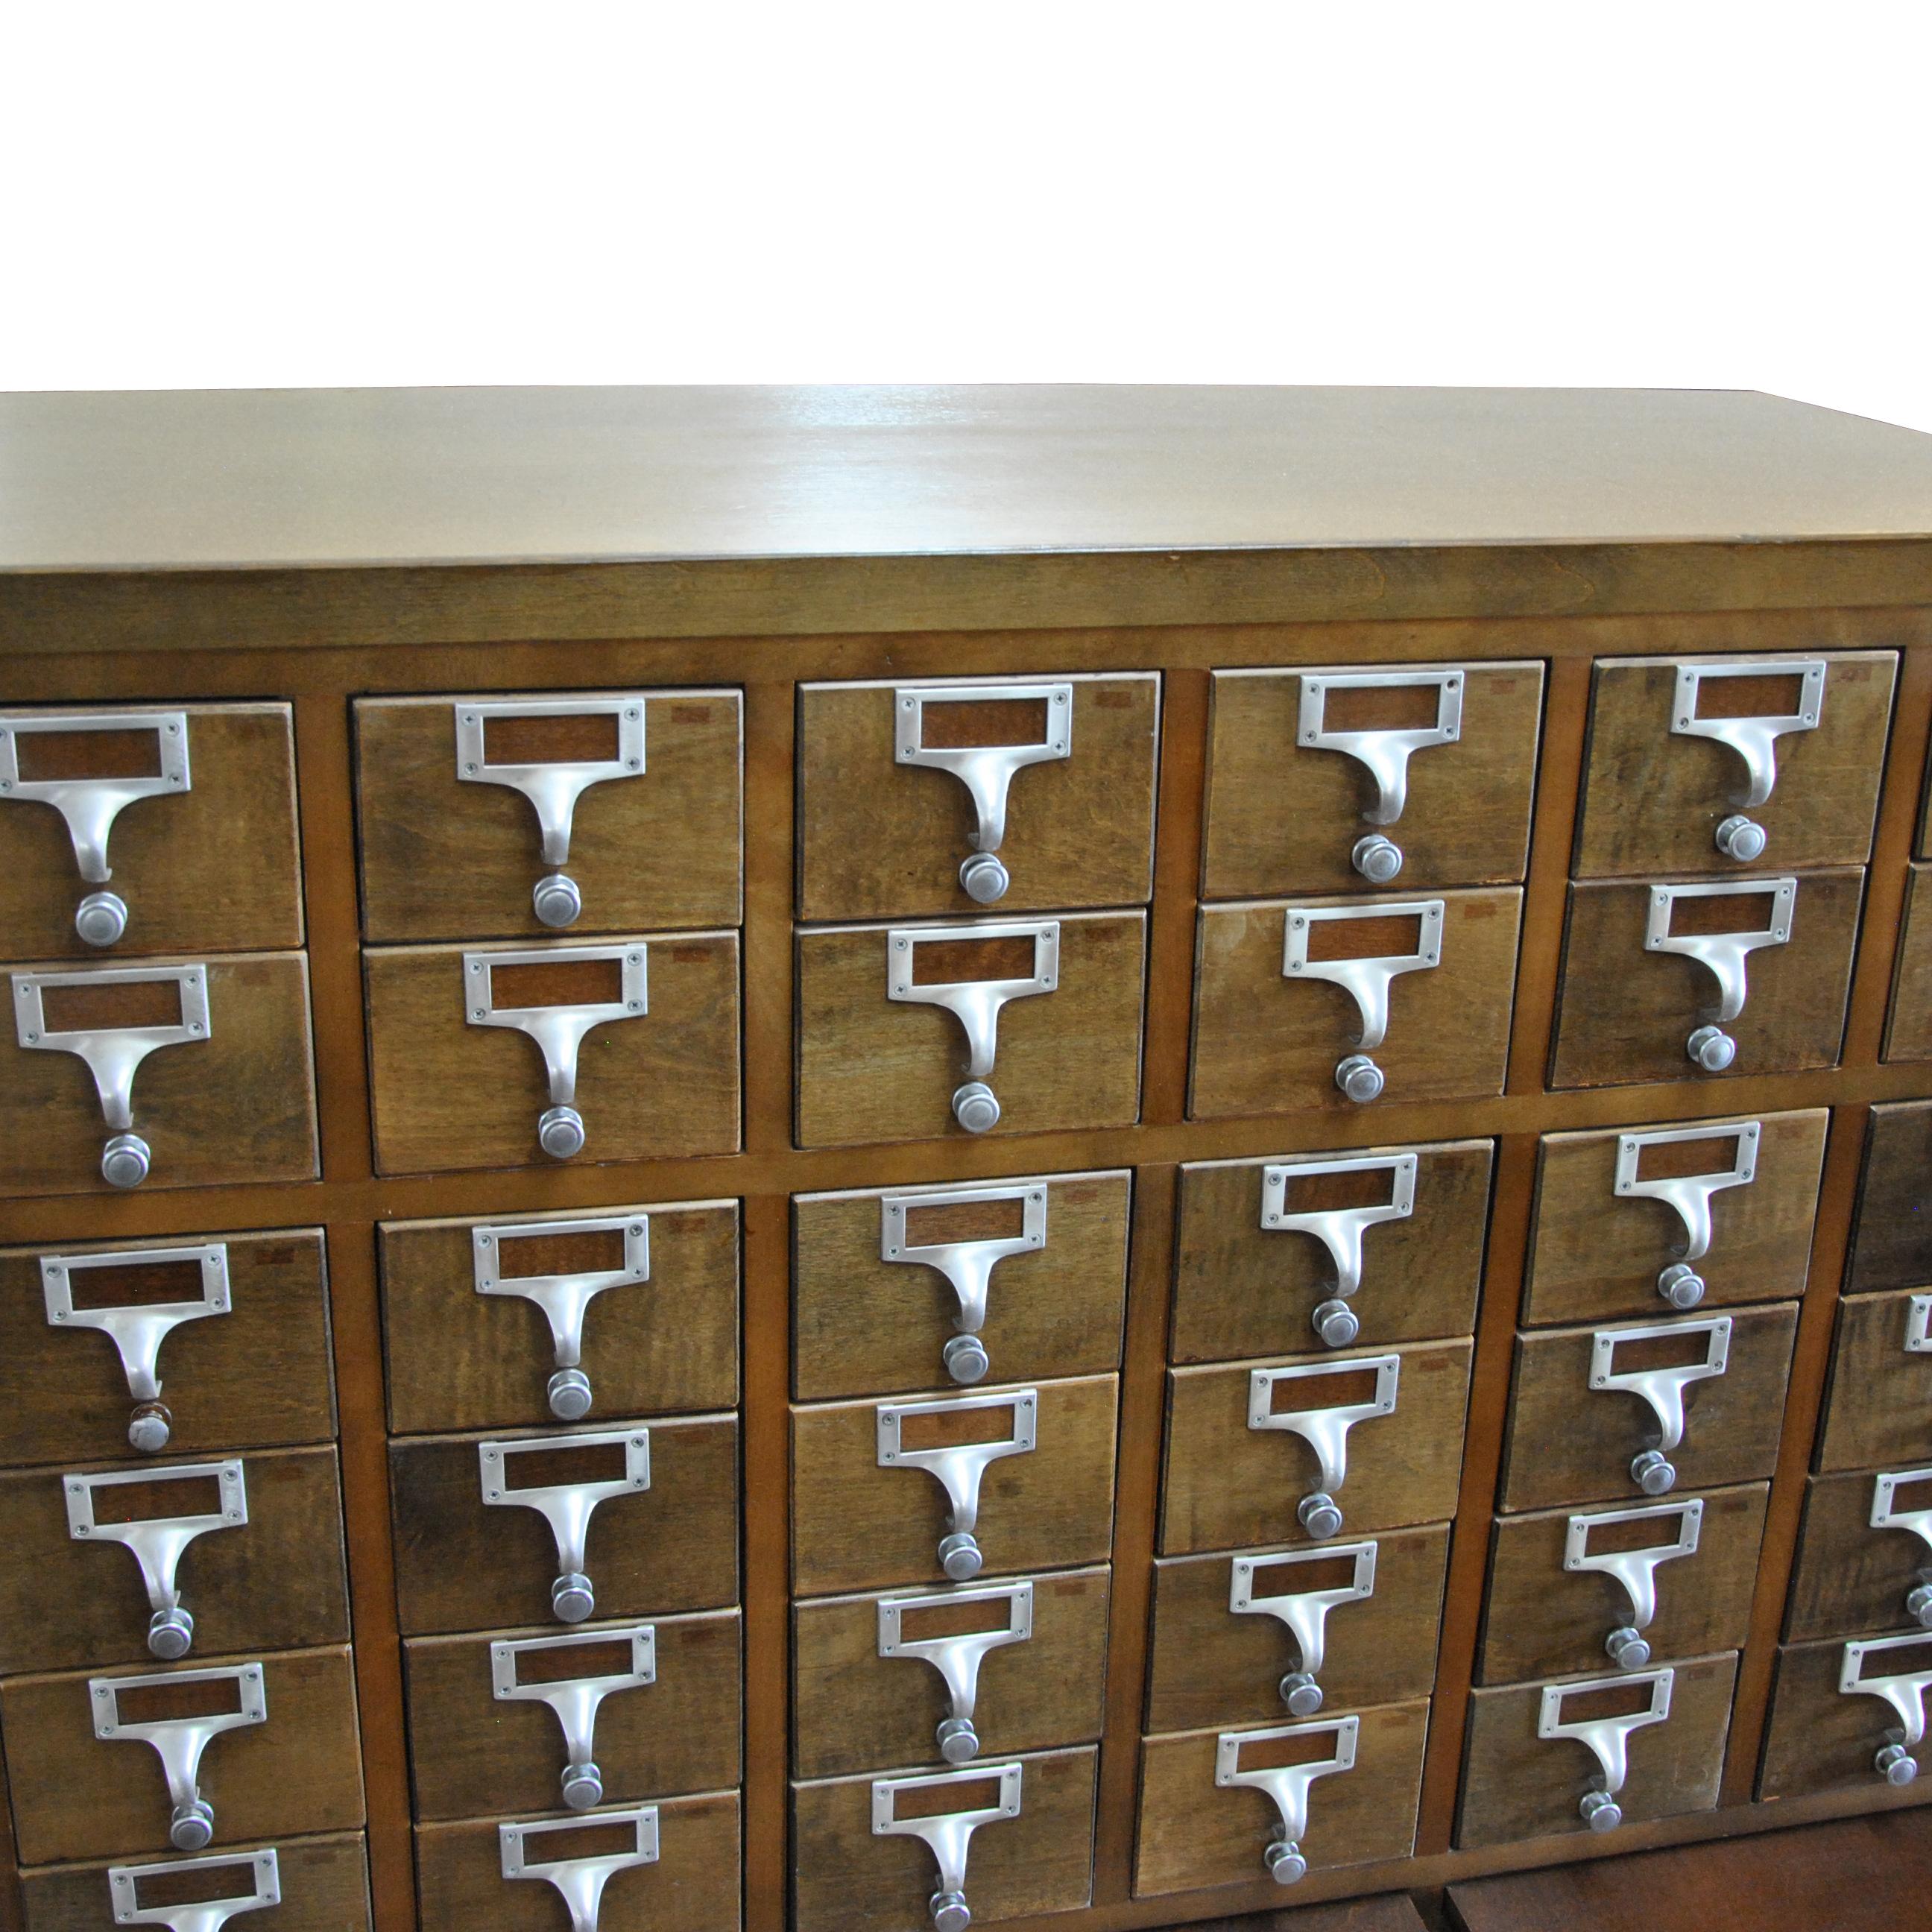 Vintage midcentury library card catalogue cabinet.

Rare walnut version on chrome base. 
72 drawers with metal pulls and trim.